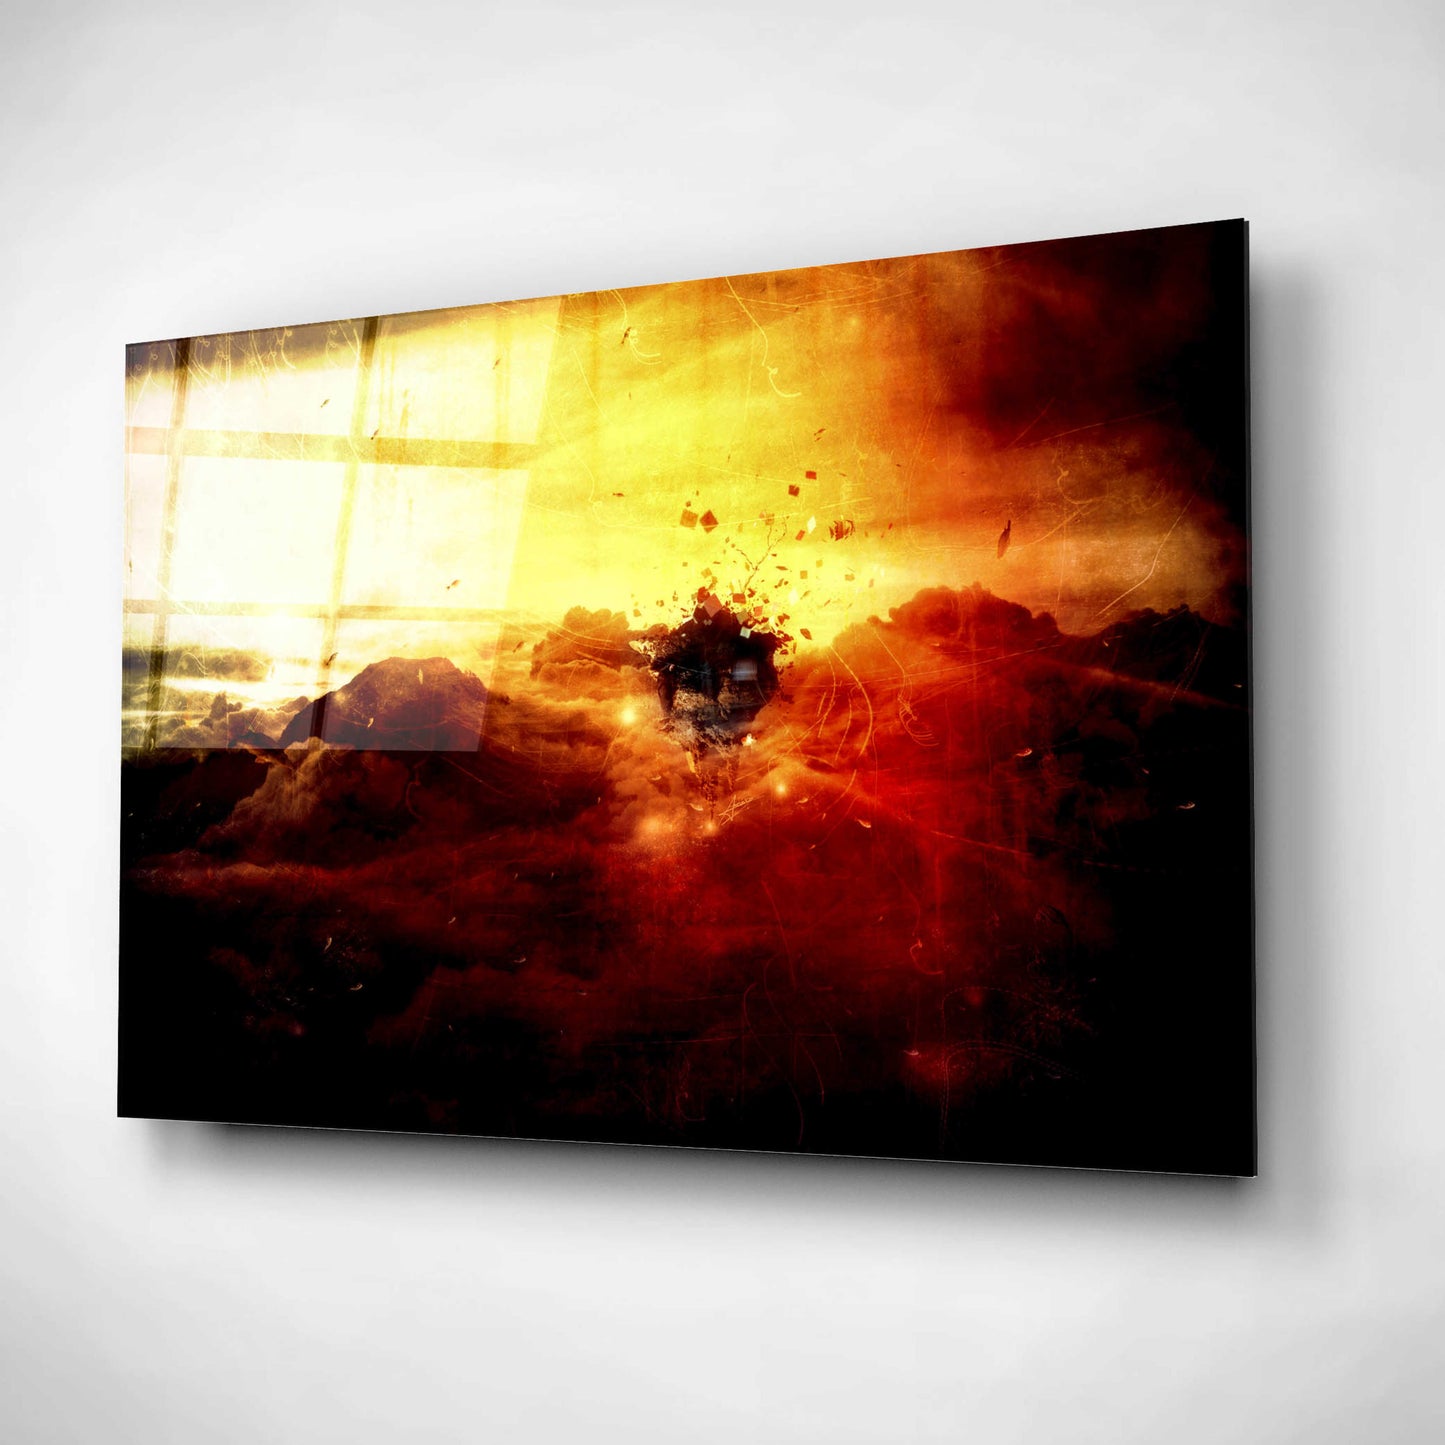 Epic Art 'Are You There' by Mario Sanchez Nevado, Acrylic Glass Wall Art,16x24